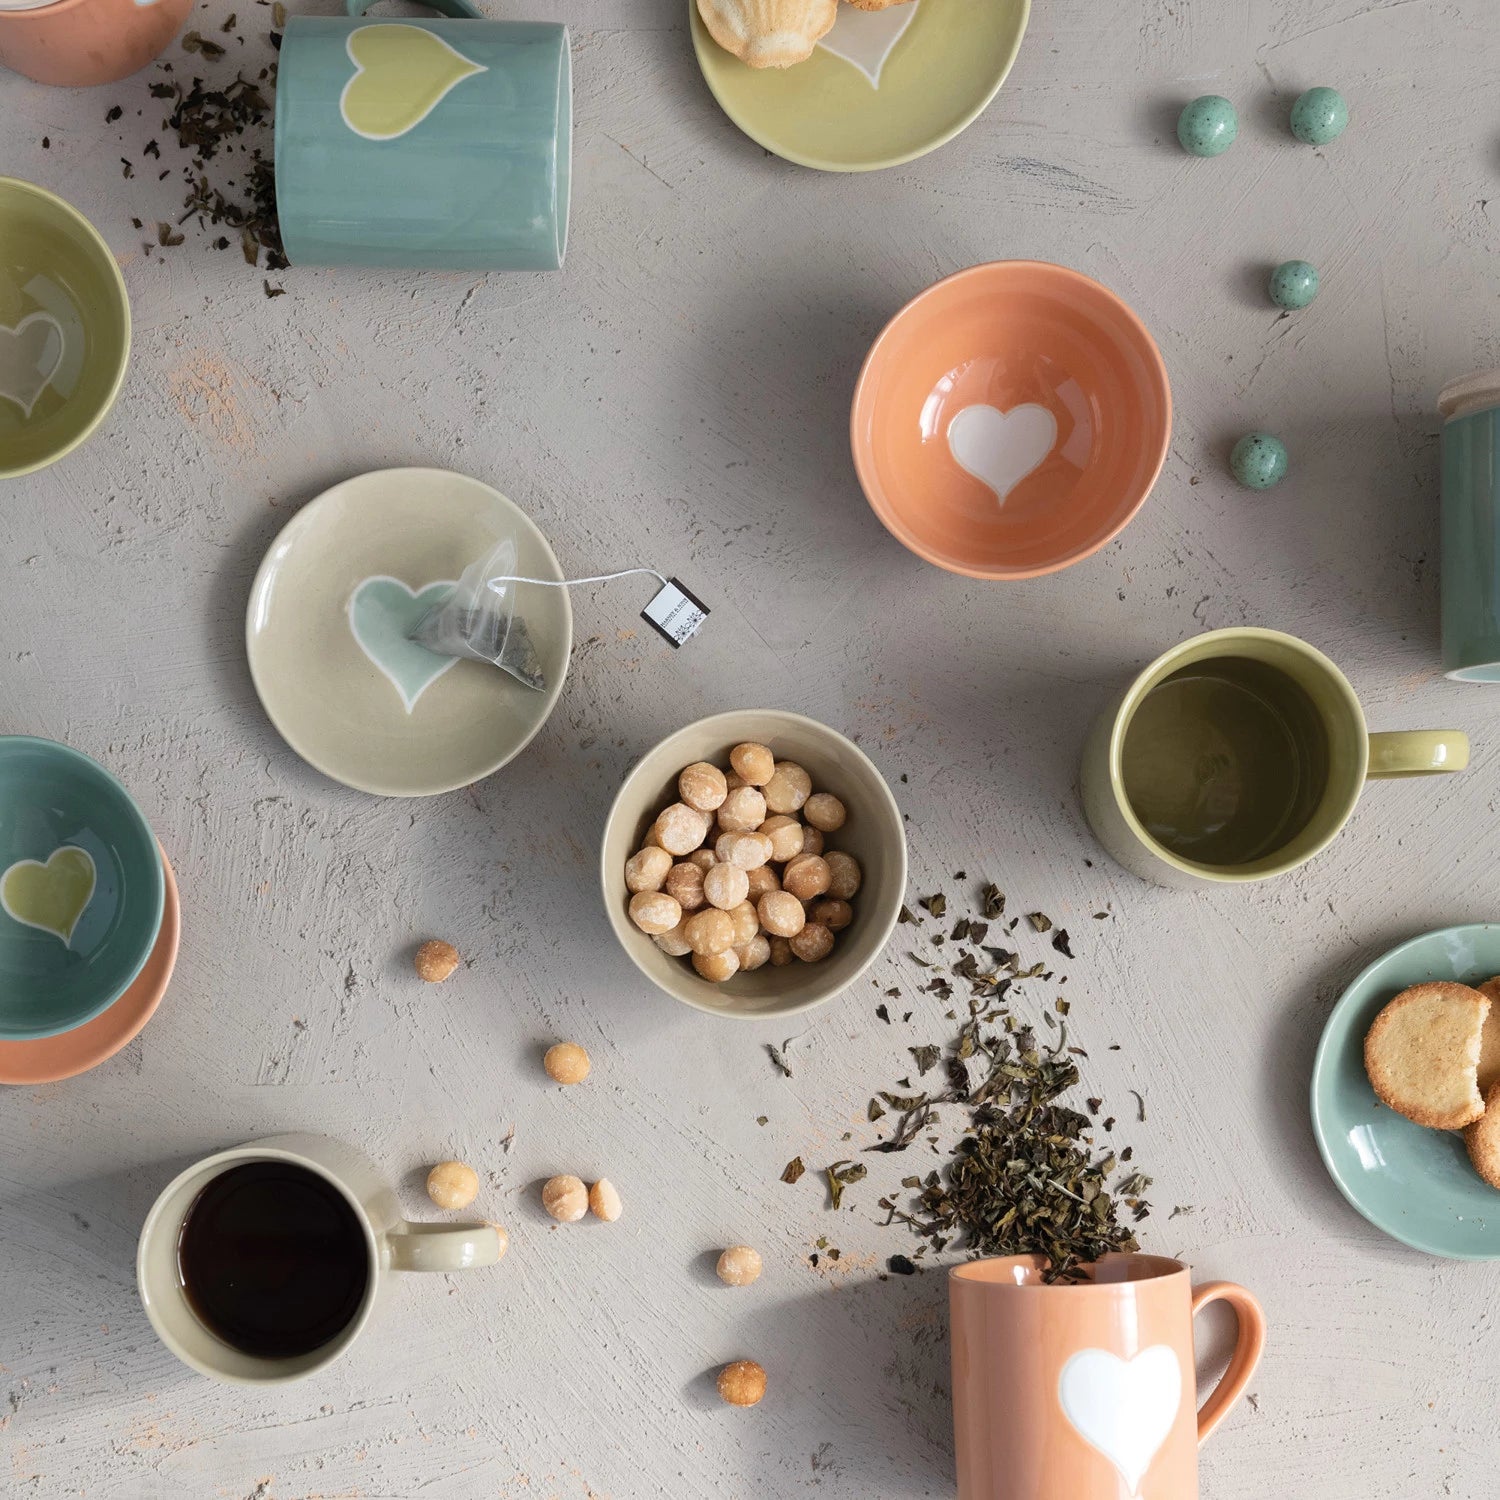 top view of all four colors of handmade stoneware mugs displayed on a table next to small bowls and small plates, tea leaves, and candy eggs